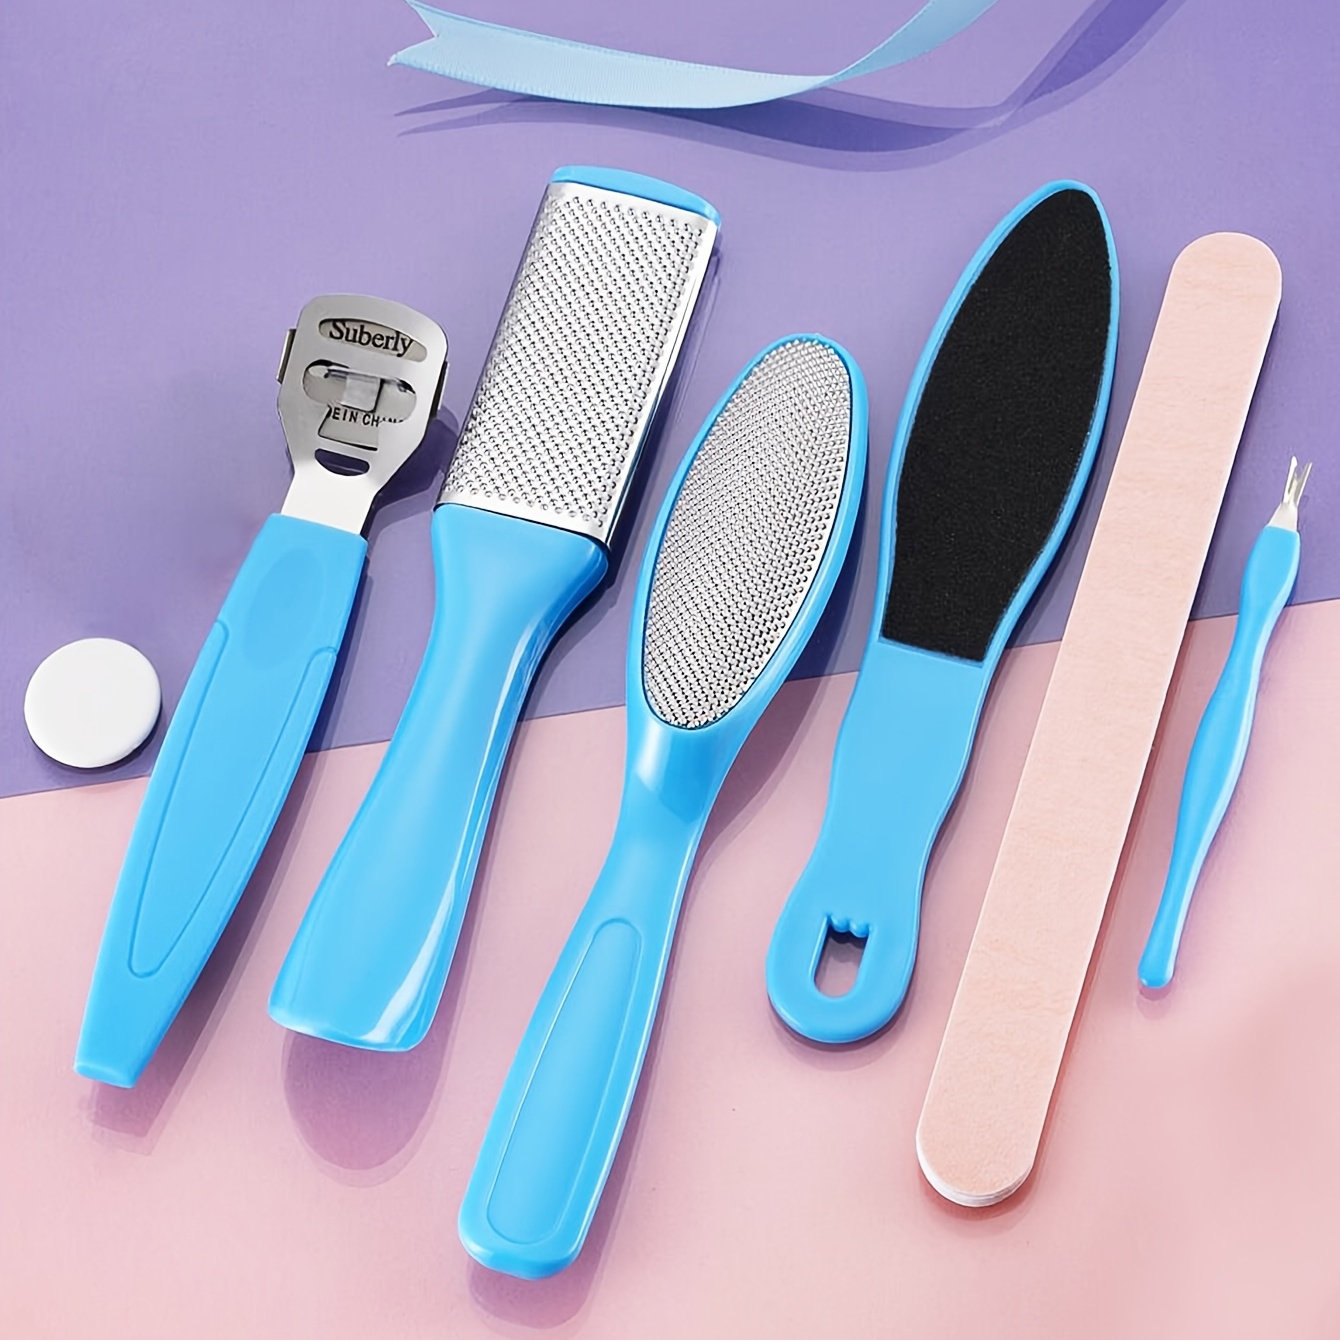 

Professional 7-in-1 Pedicure Tool Set For Dead Skin And Foot Care - Includes Callus Remover And Foot File For Men And Women